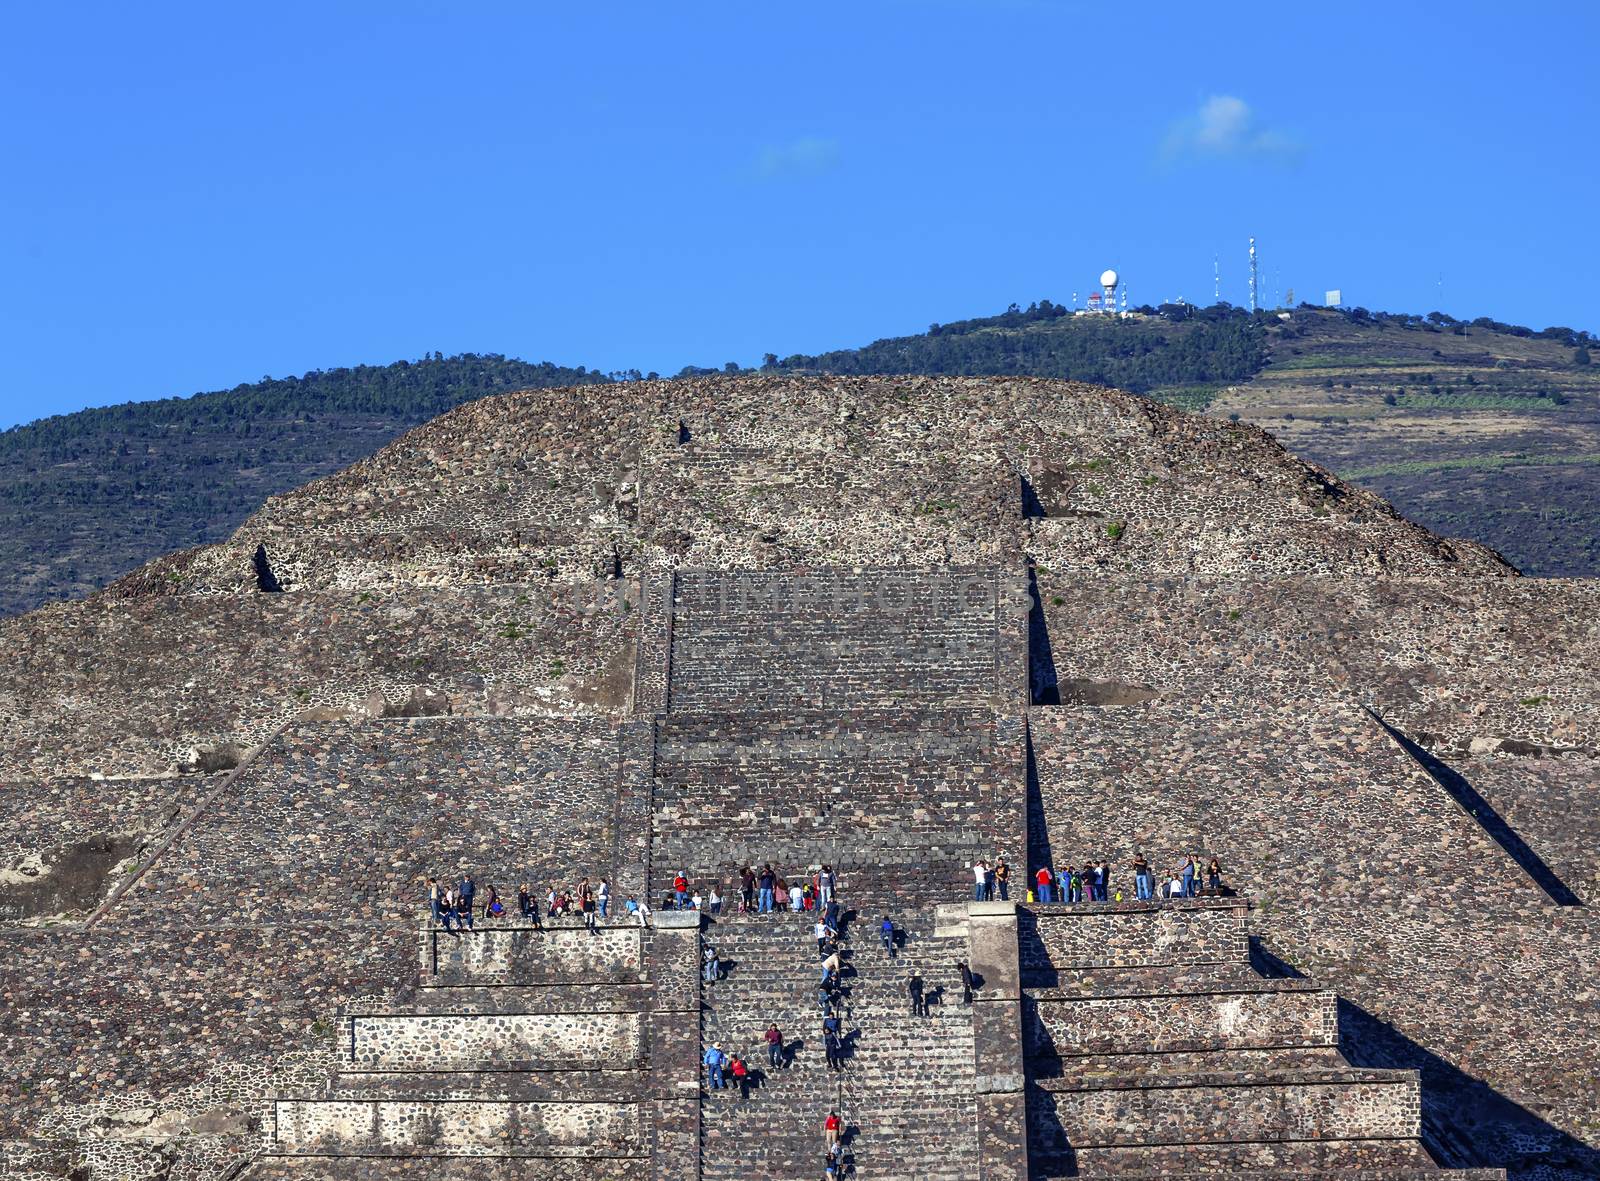 Temple of Moon Pyramid Teotihuacan, Mexico City Mexico